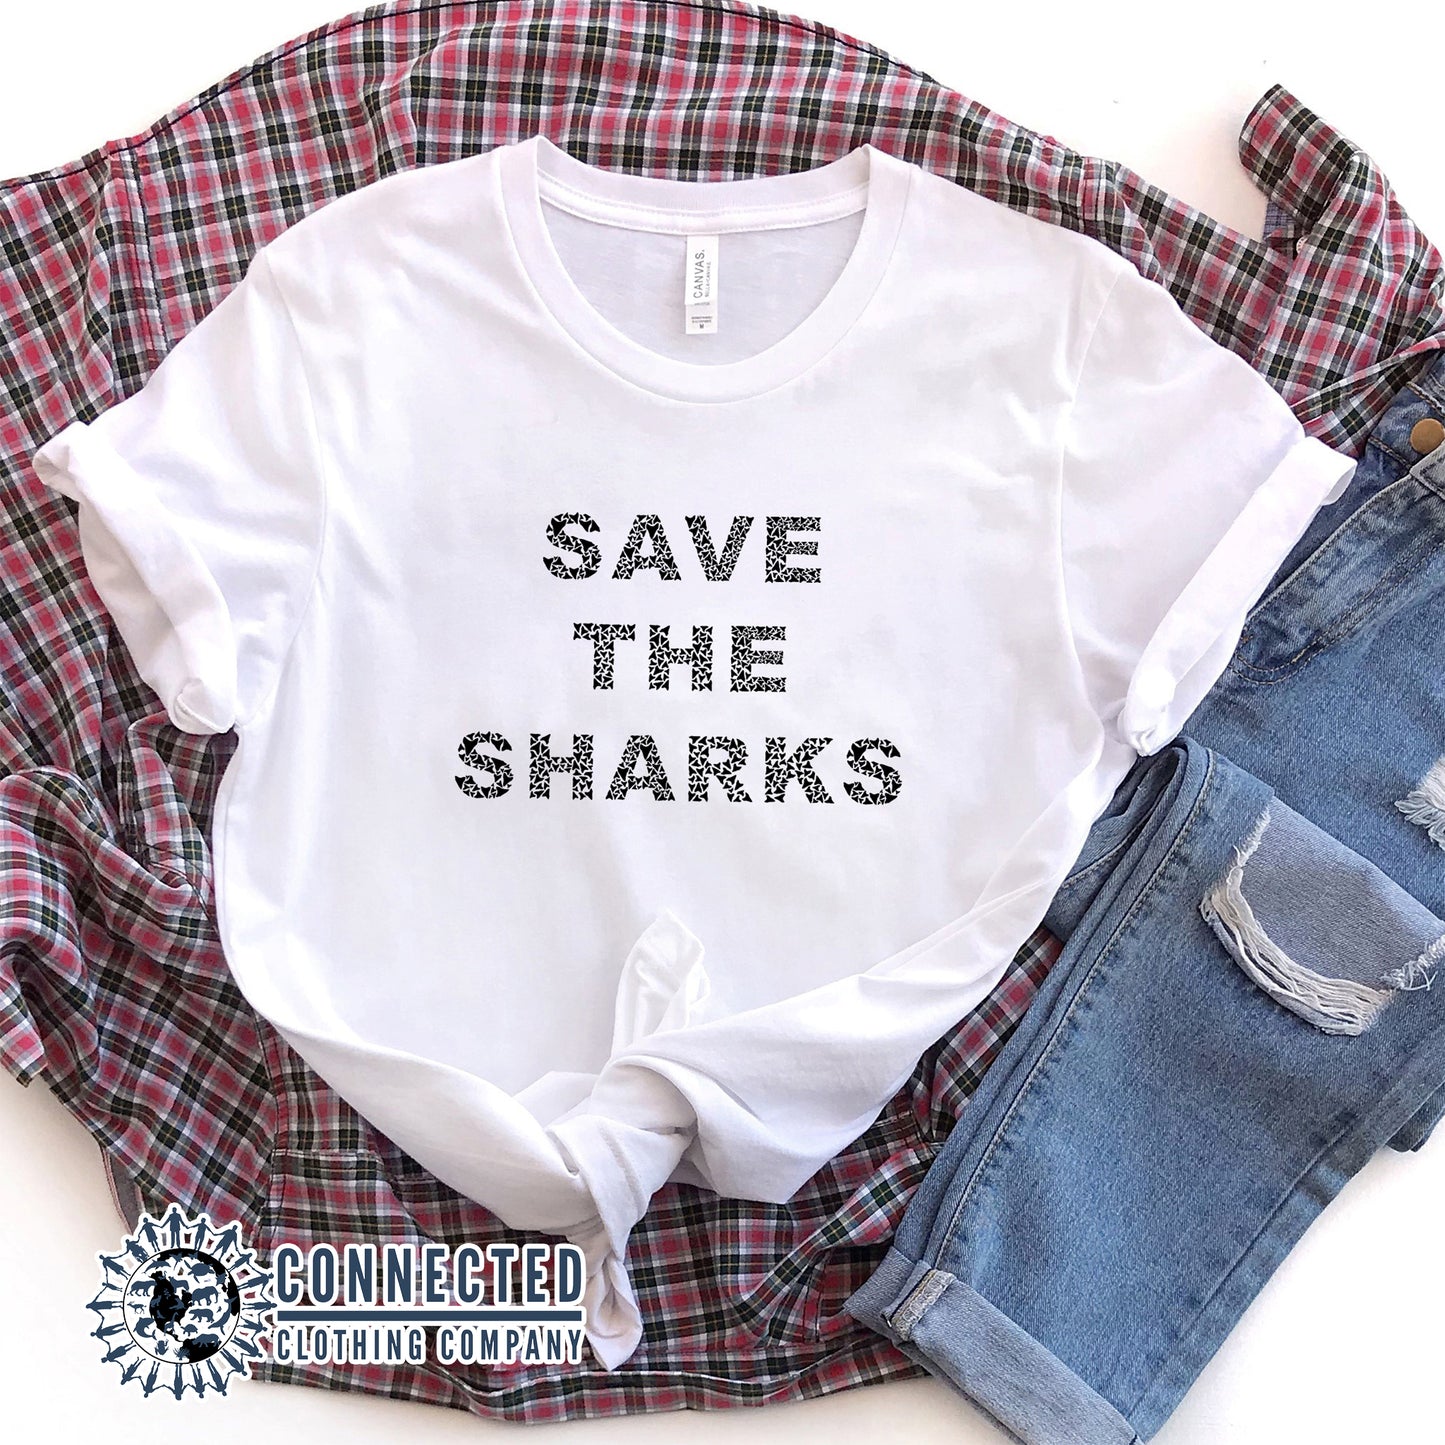 White Save The Sharks Short-Sleeve Unisex T-Shirt reads "Save The Sharks." - Connected Clothing Company - Ethically and Sustainably Made - 10% donated to Oceana shark conservation